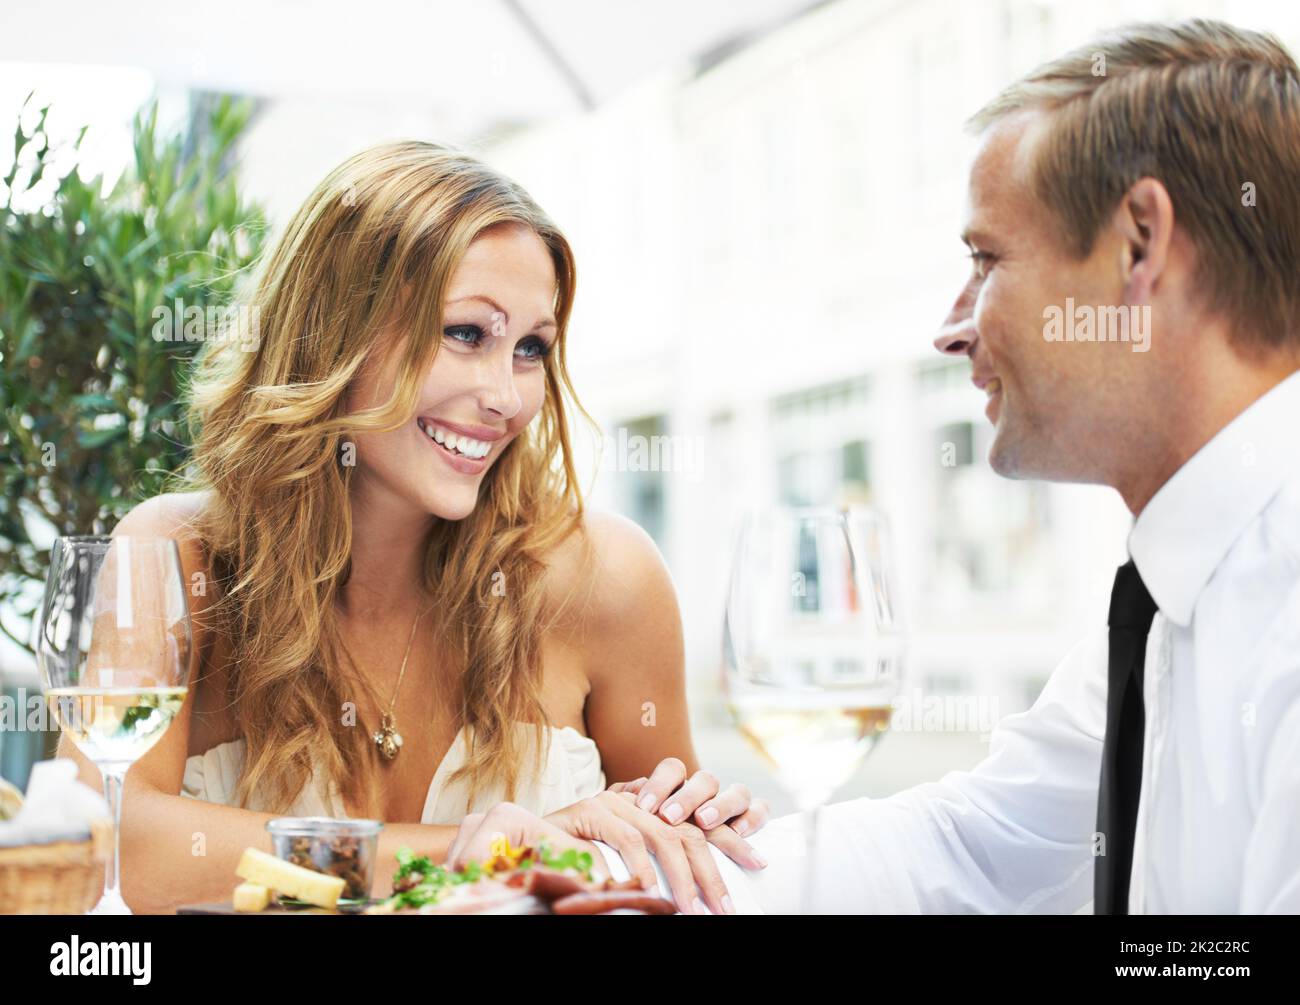 Her first date after plastic surgery. A woman with cosmetic enhancements admiring her boyfriend in a restaurant. Stock Photo